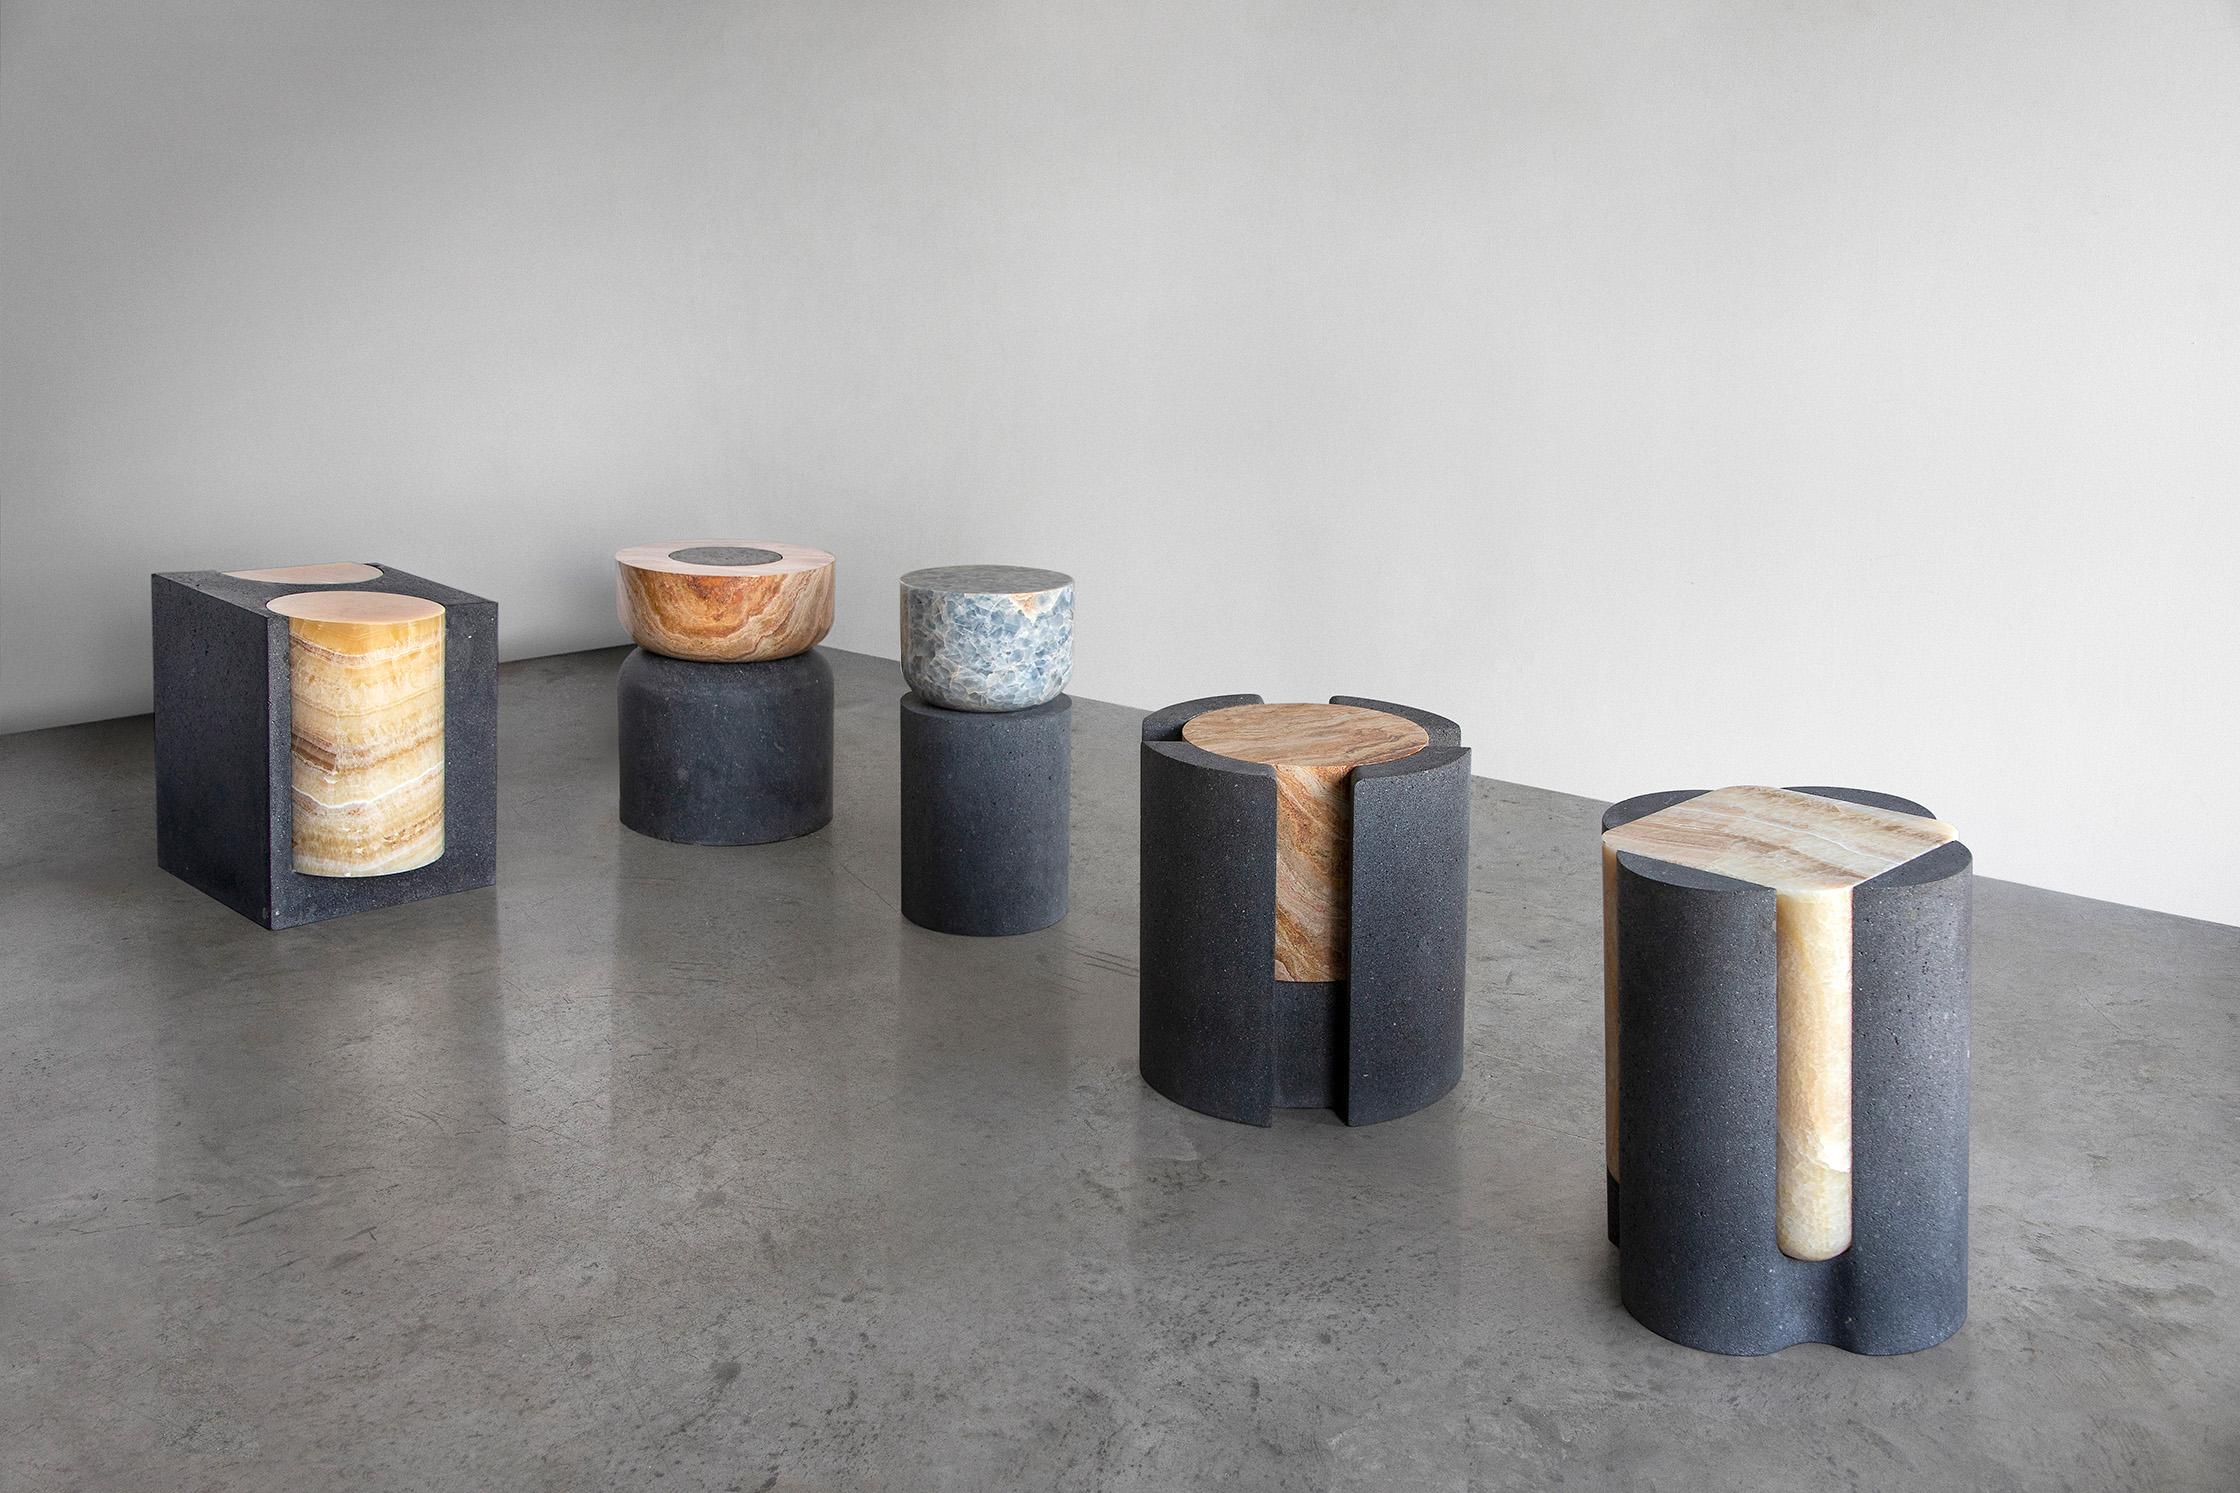 Organic Modern Volcanic Shade III Stool/Table by Sten Studio, Represented by Tuleste Factory